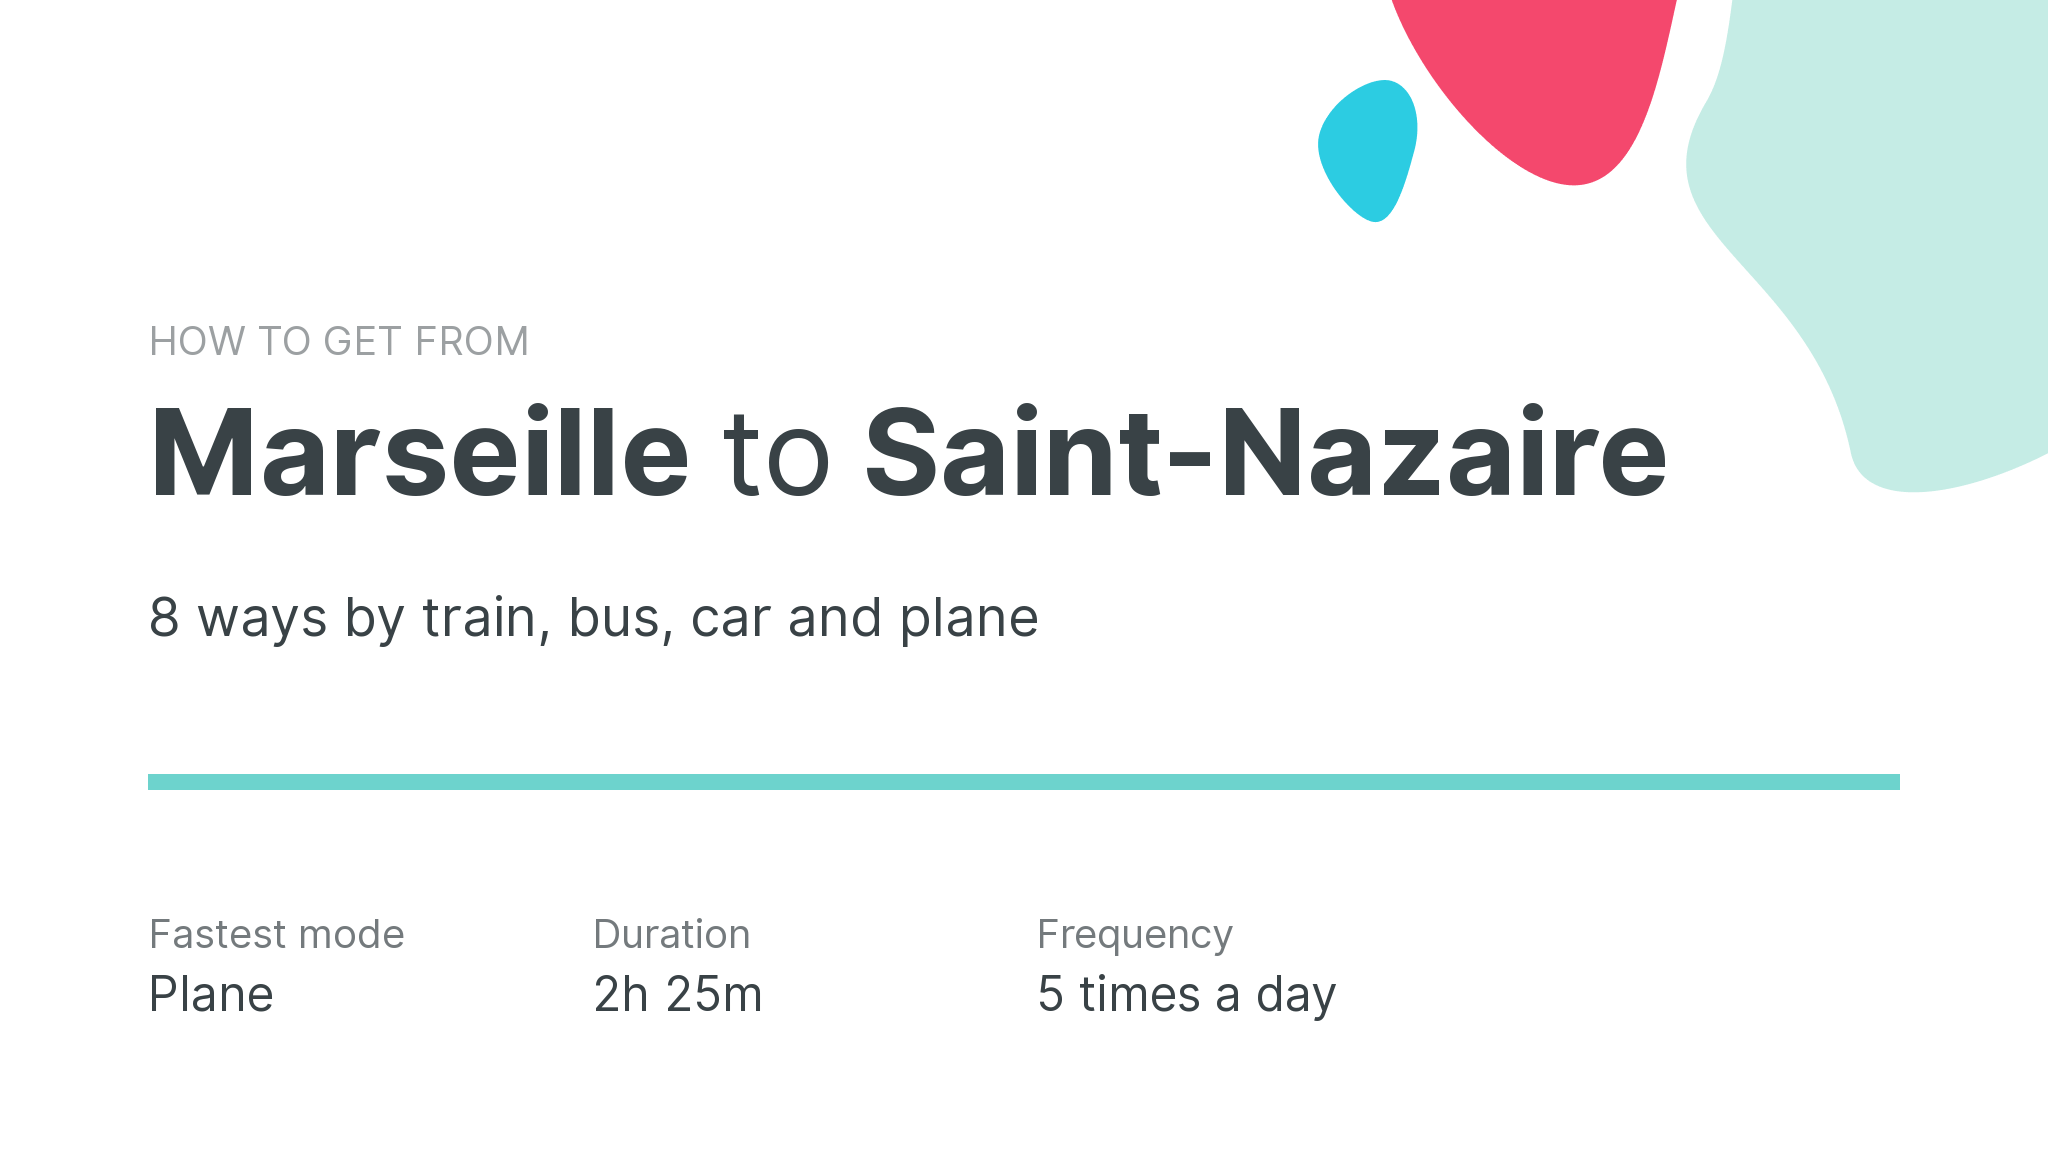 How do I get from Marseille to Saint-Nazaire